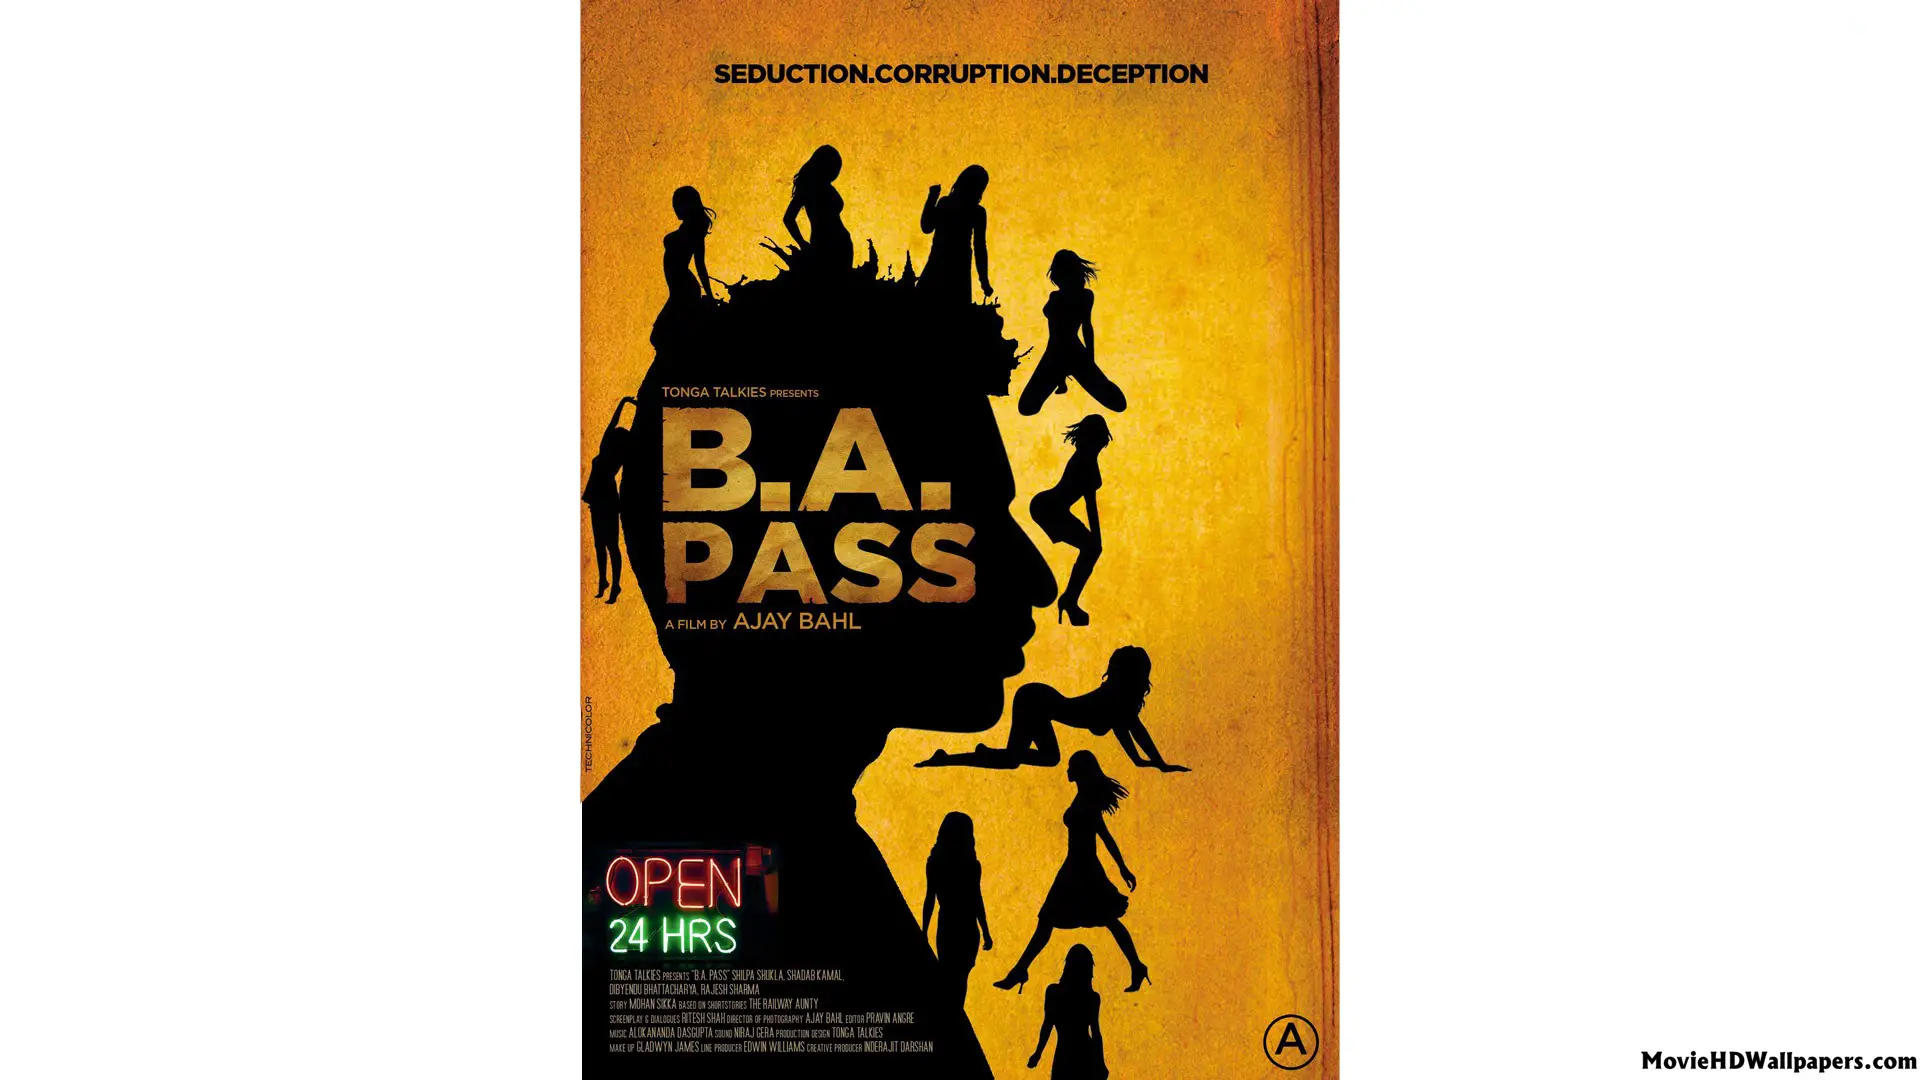 B.A. Pass Movie HD Wallpapers